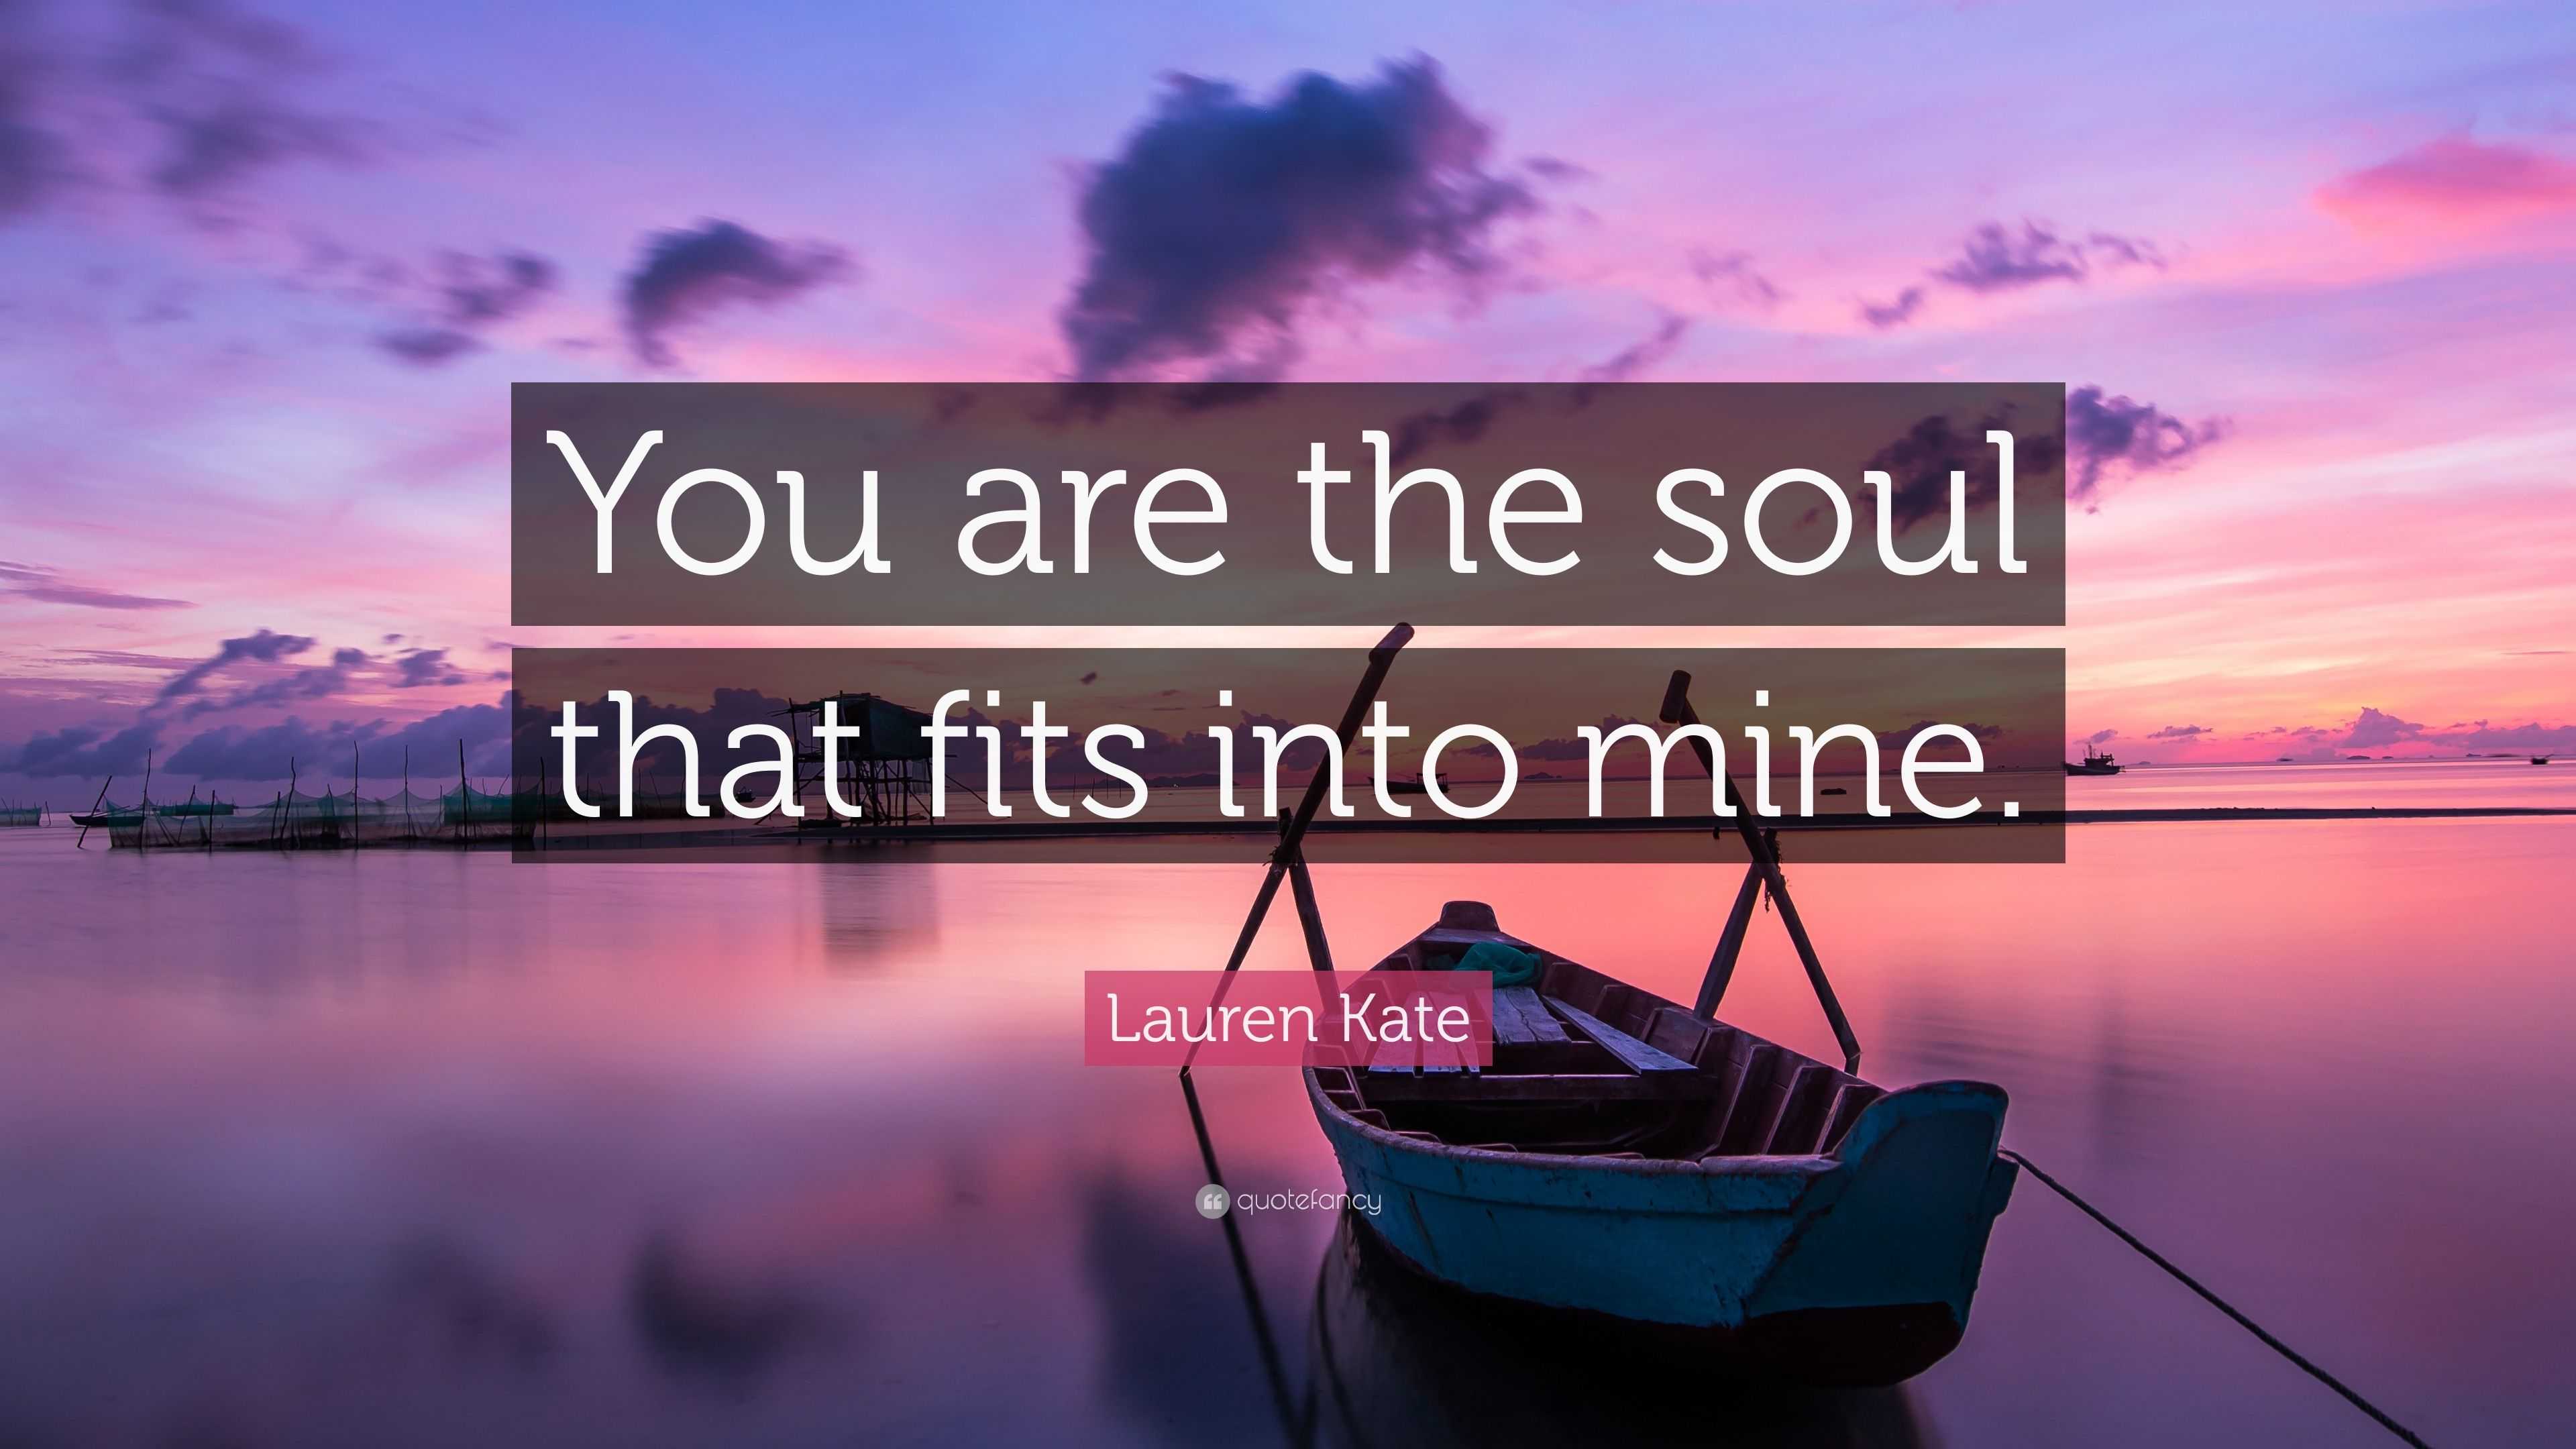 Lauren Kate Quote “you Are The Soul That Fits Into Mine” 2935